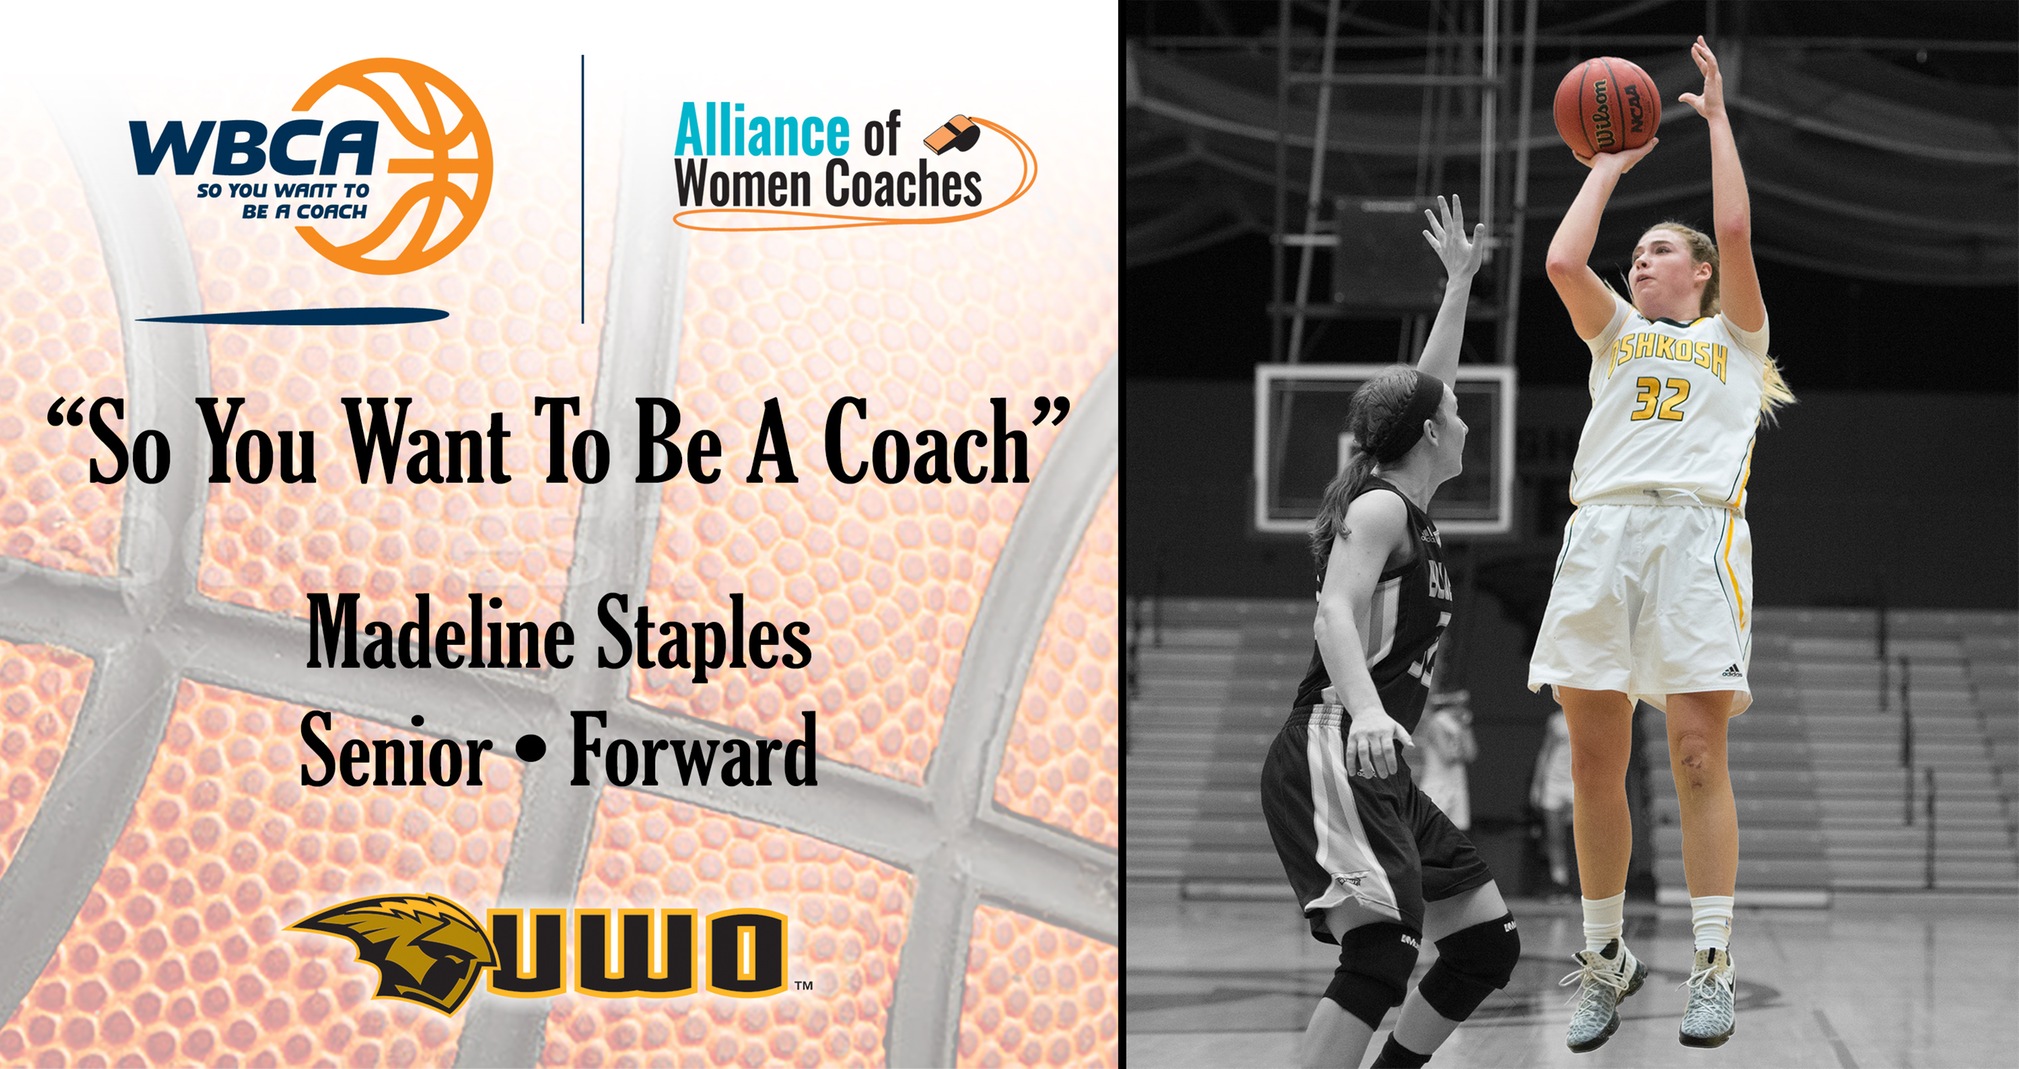 Staples Selected to WBCA's “So You Want To Be A Coach” Program